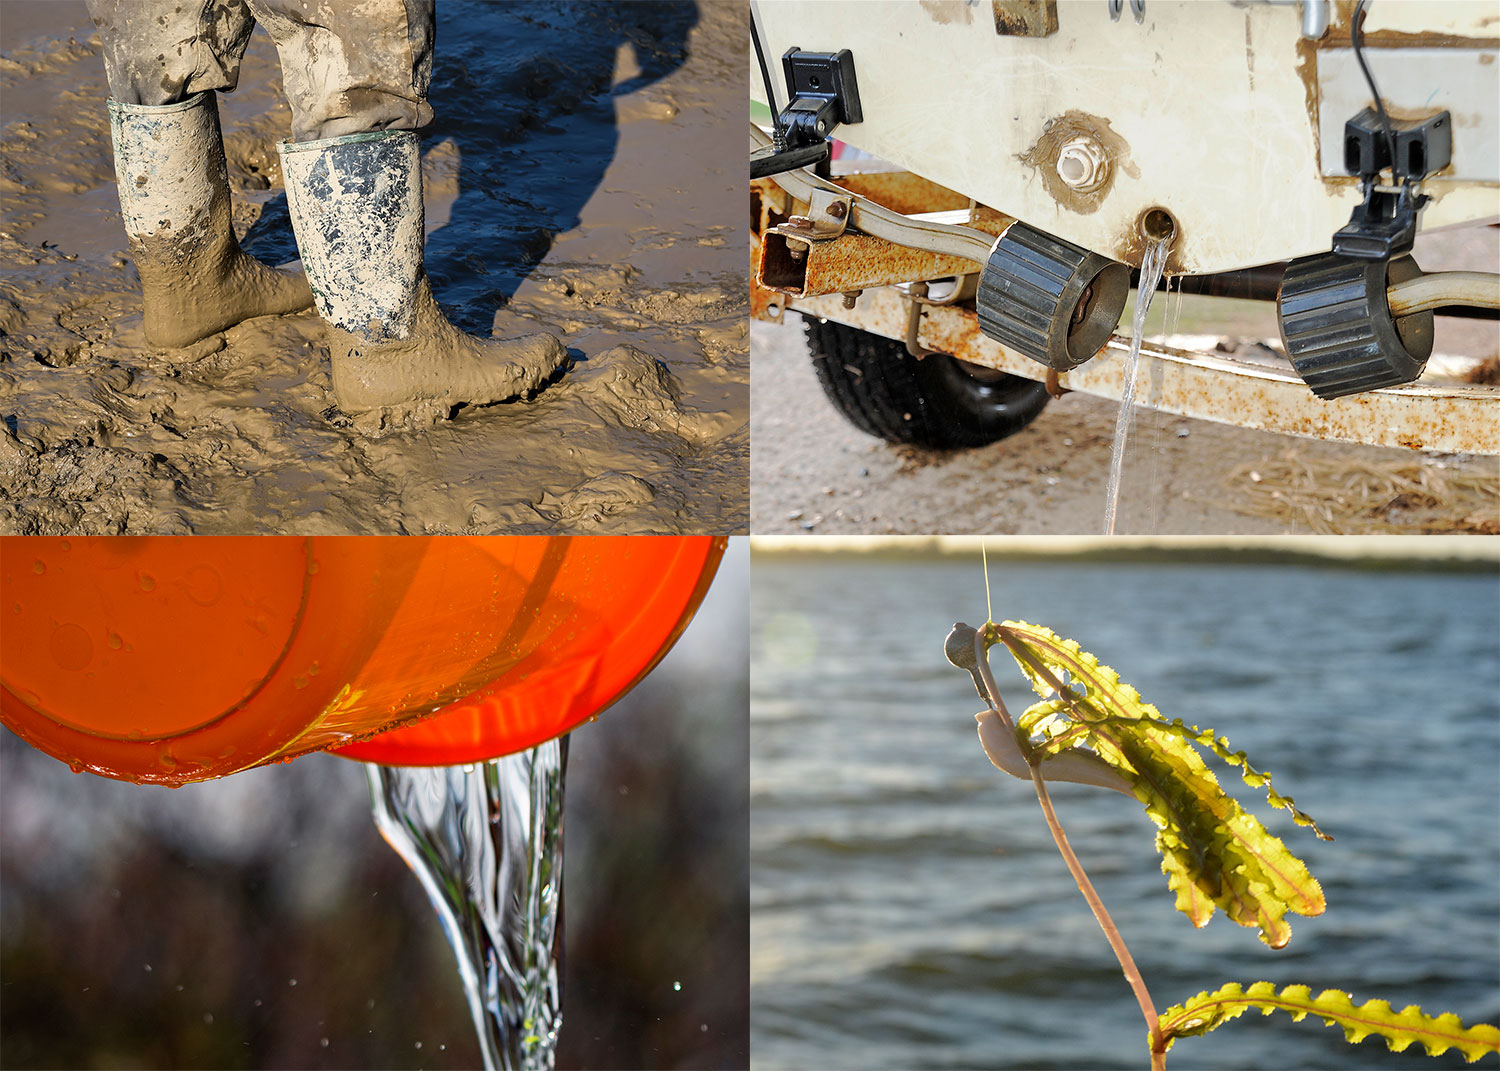 Cleaning examples: muddy boots, boat draining water, water emptying from a bucket, vegetation on a fish hook